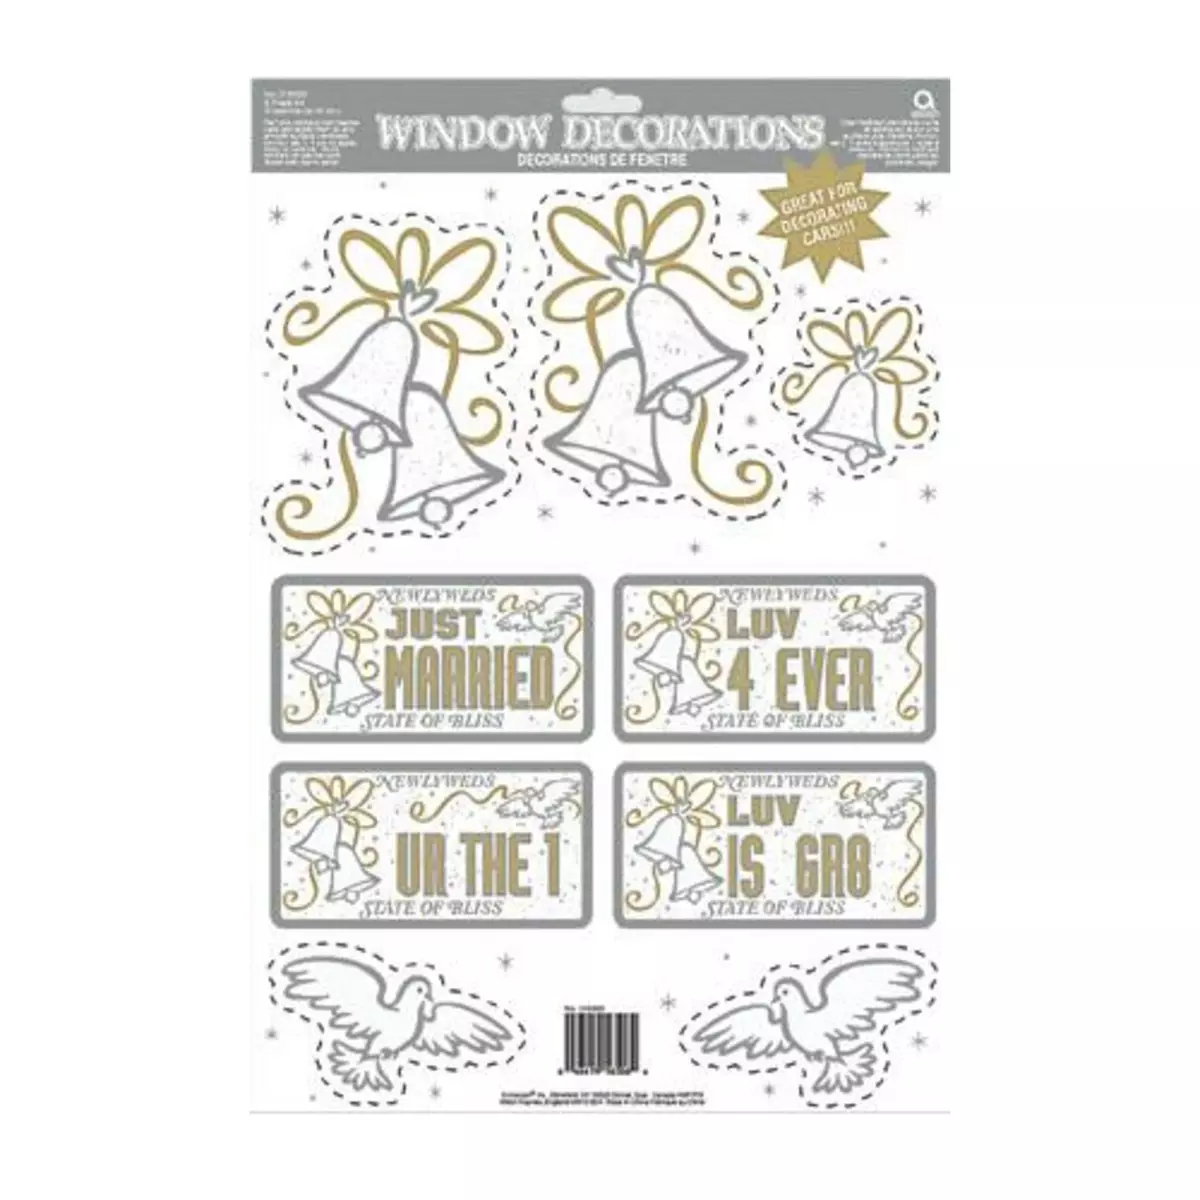 Rubie's 9 Decorations Vitres Mariage Assorties